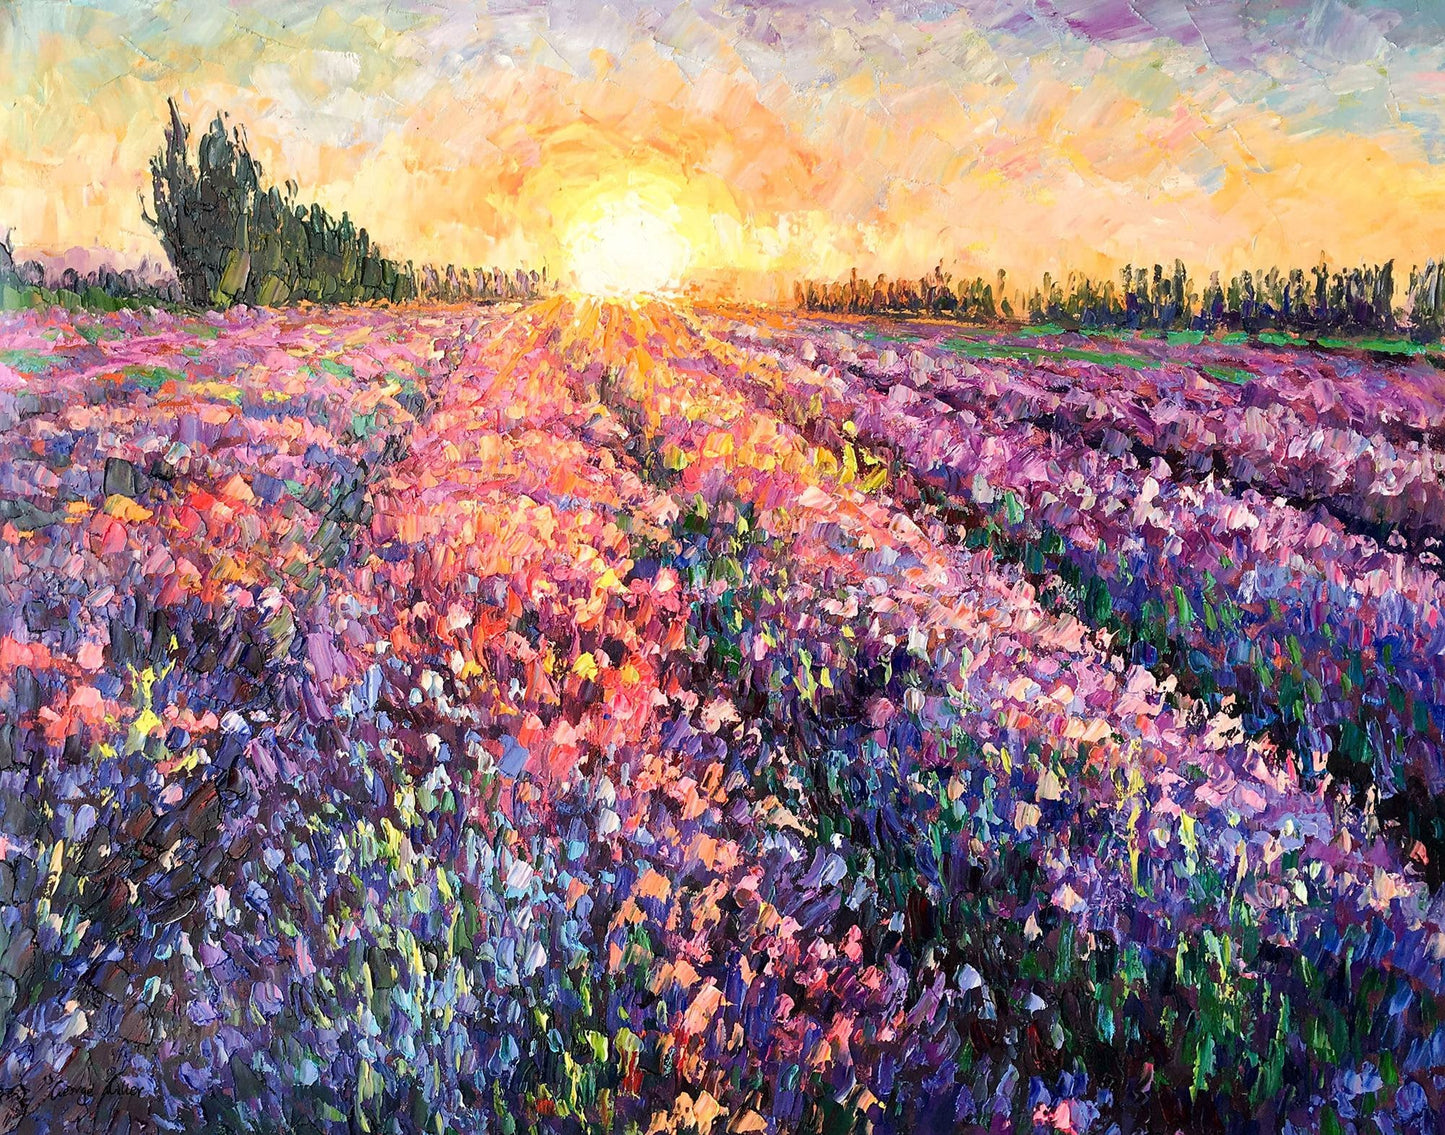 Oil Painting Tuscany Lavender Fields Sunrise, Living Room Decor, Large Abstract Art, Canvas Art, Contemporary Painting Large Canvas Wall Art